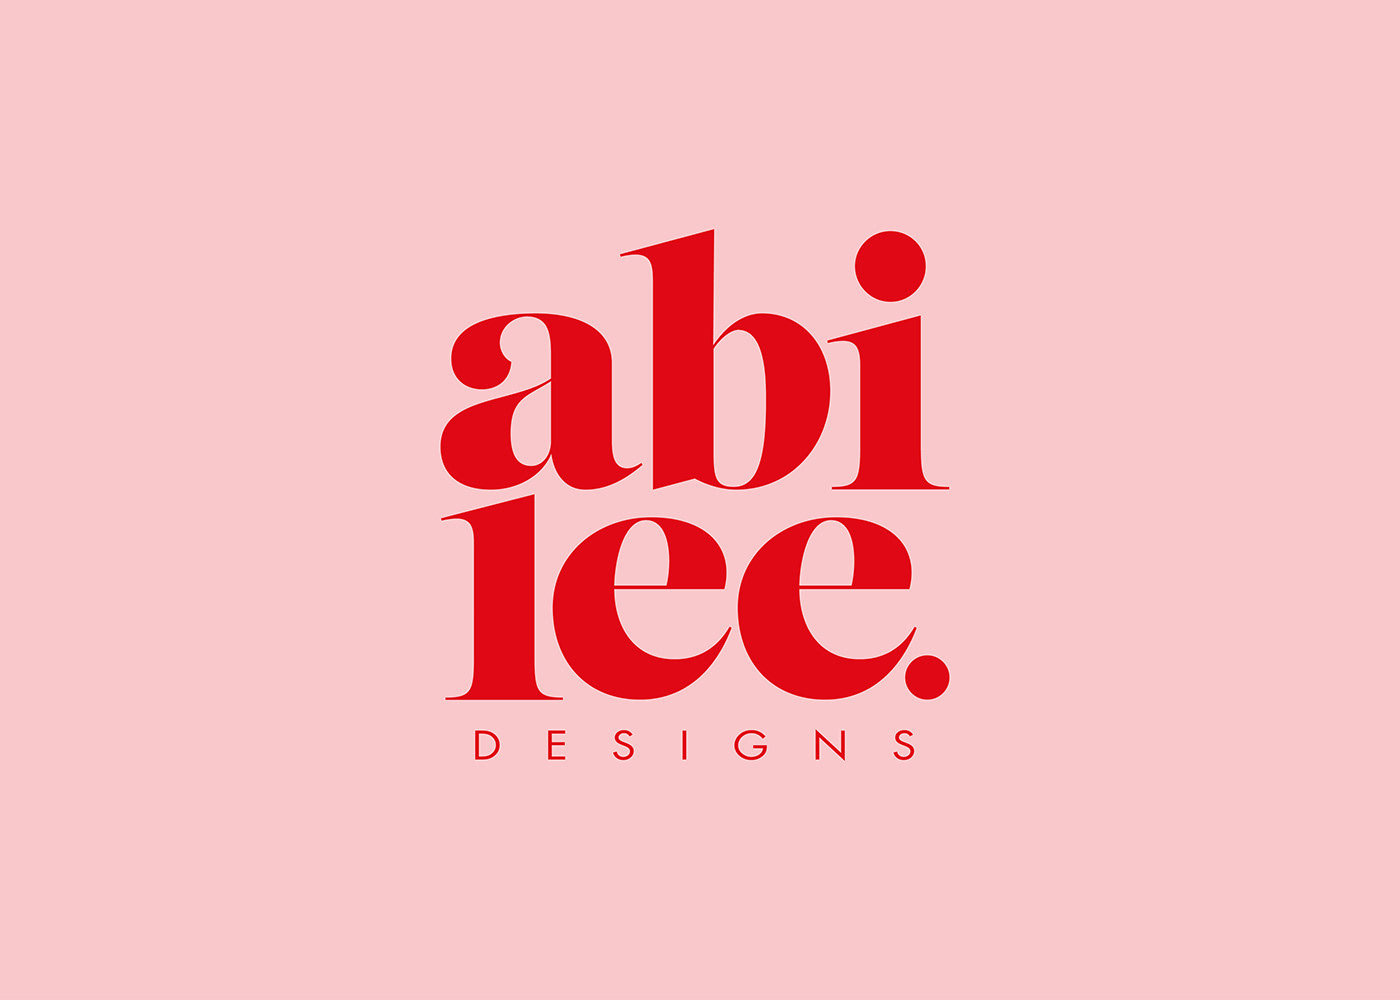 logos branding  Personal Identity personal branding Graphic Designer Pink and Red abi lee designs